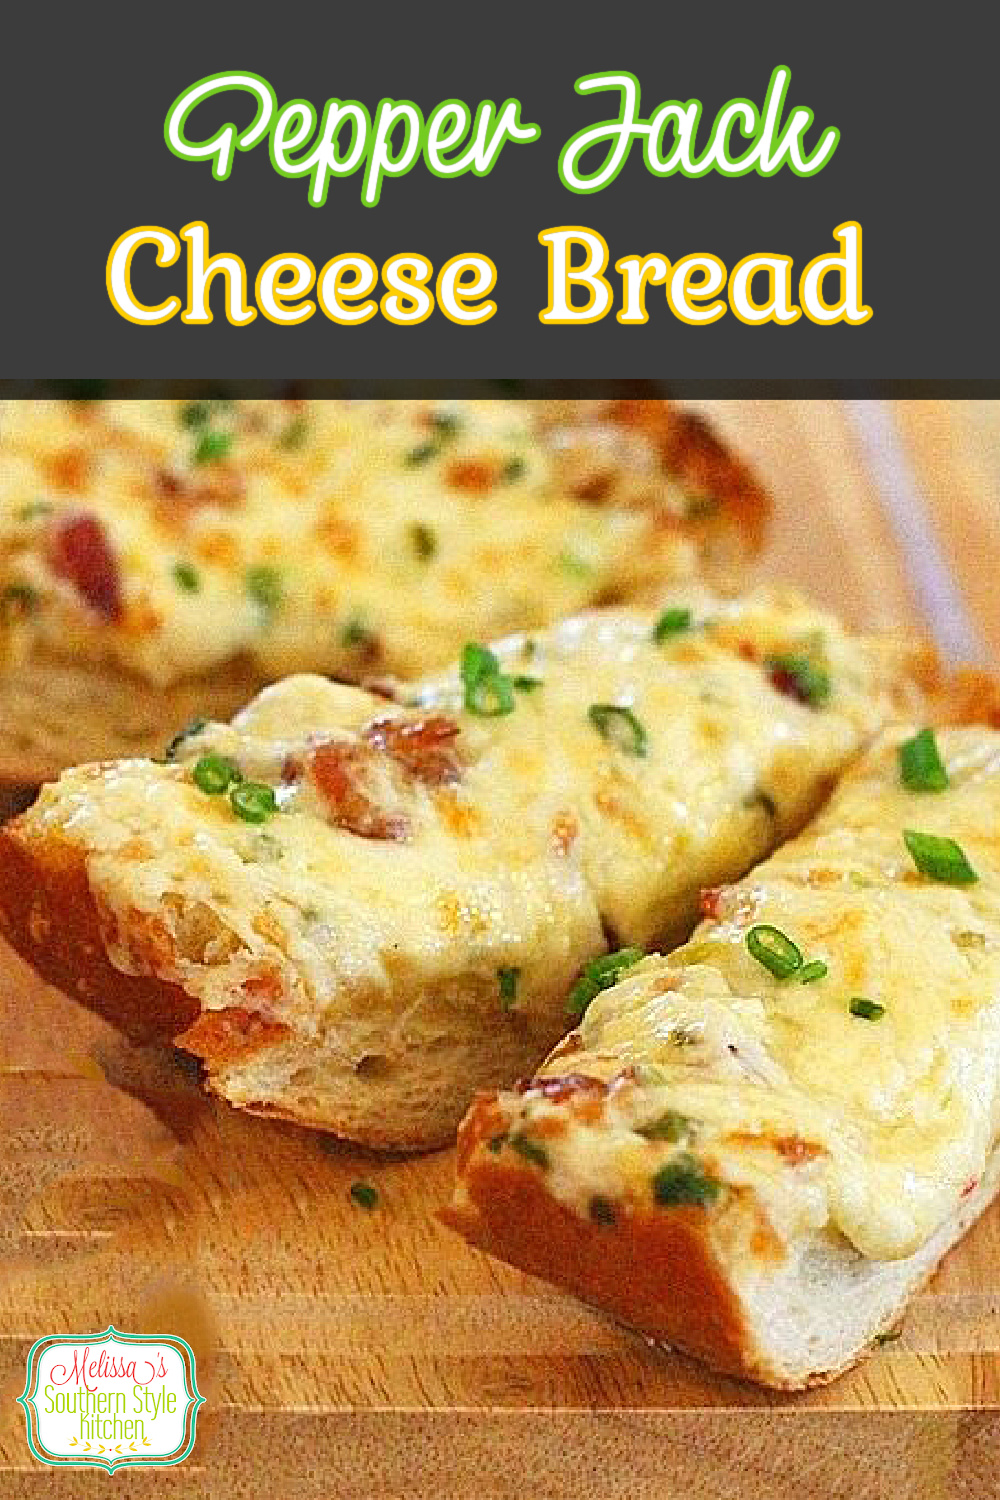 Pepper Jack Cheese Bread with Bacon And Jalapenos #bread #cheesebread #breadrecipes #appetizers #footballfood #partyfood #jalapenos #bacon #garlicbread #superbowlrecipes #recipes #food #easyrecipes #sidedish #melissassouthernstylekitchen via @melissasssk